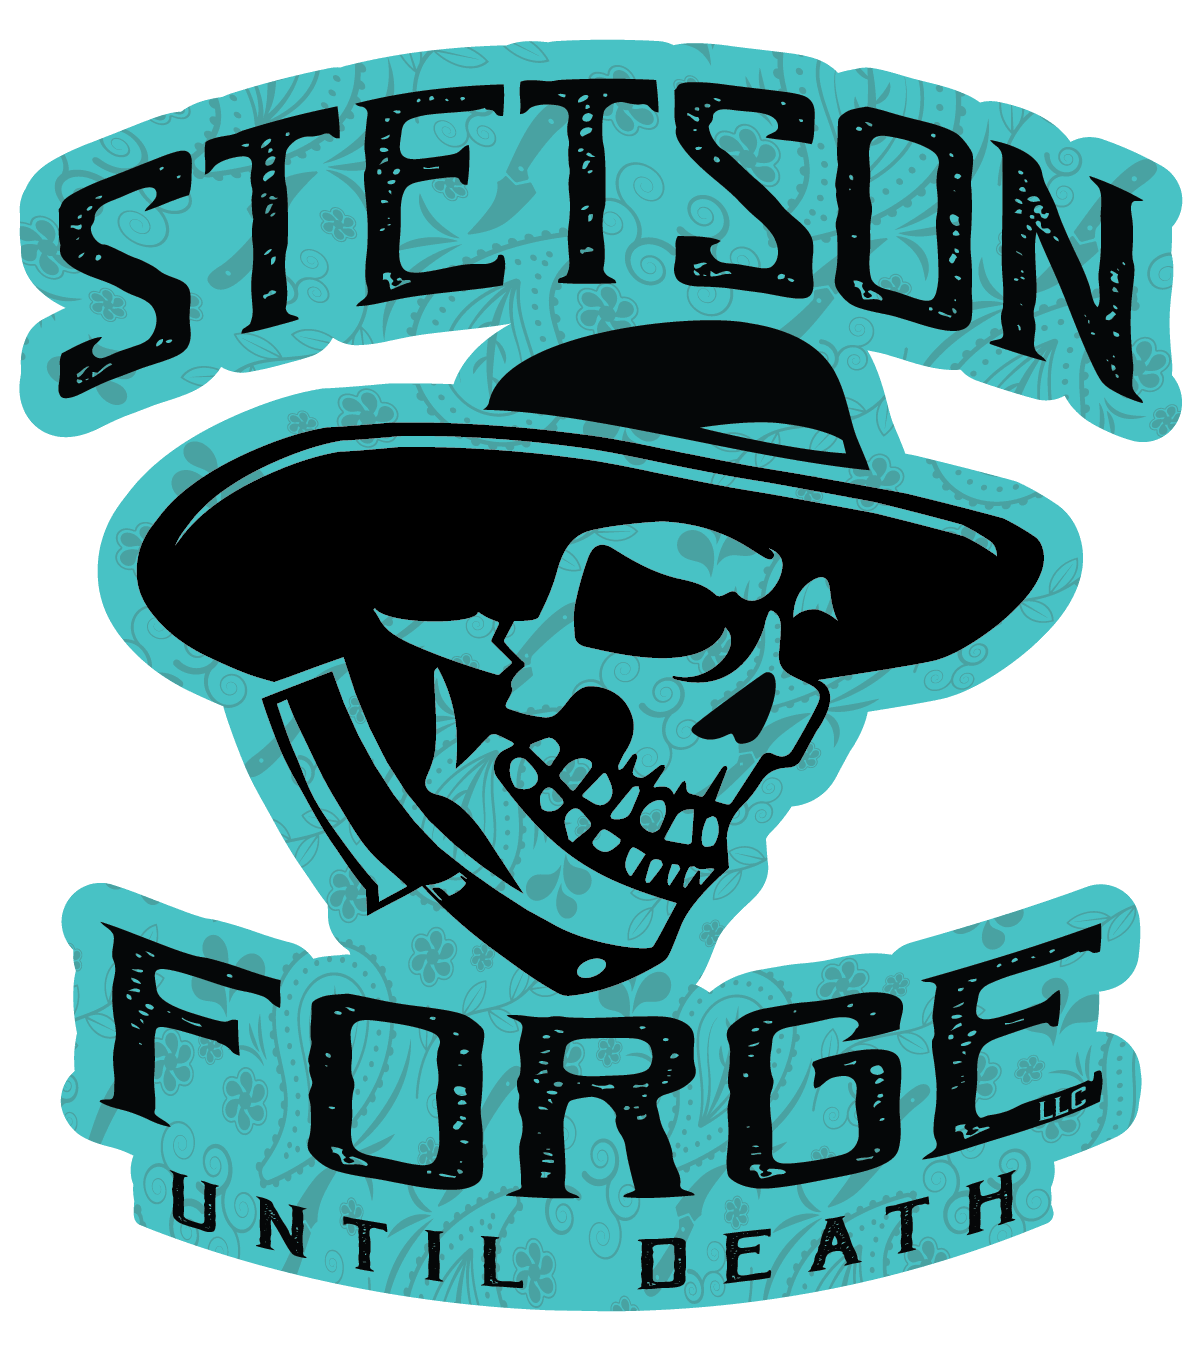 Stetson Forge Stickers - Stetson Forge